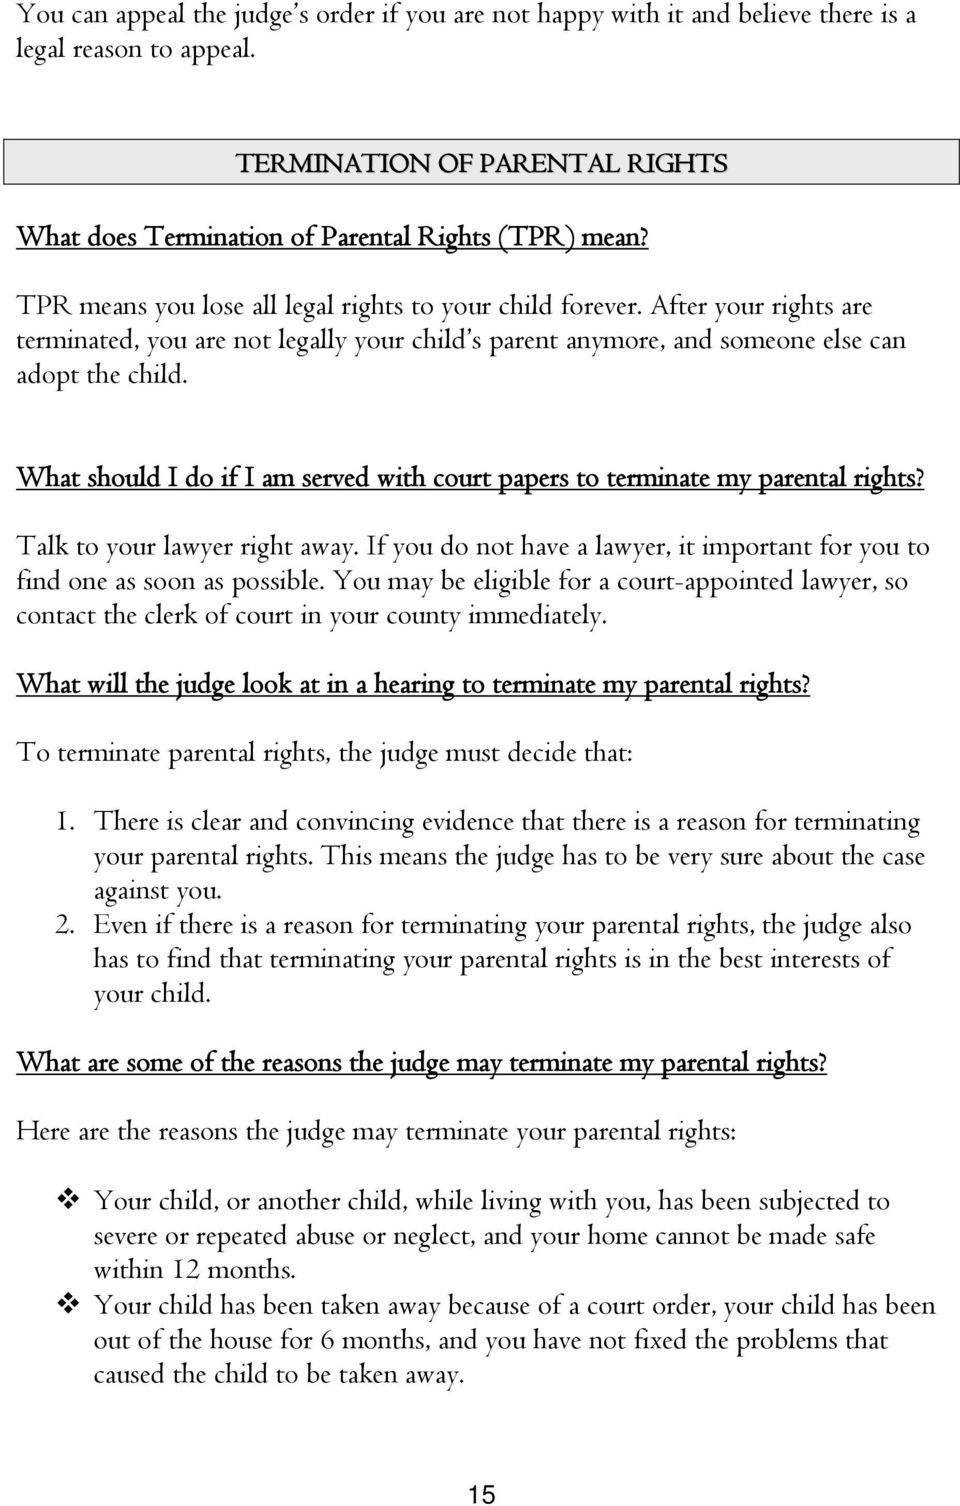 What should I do if I am served with court papers to terminate my parental rights? Talk to your lawyer right away. If you do not have a lawyer, it important for you to find one as soon as possible.